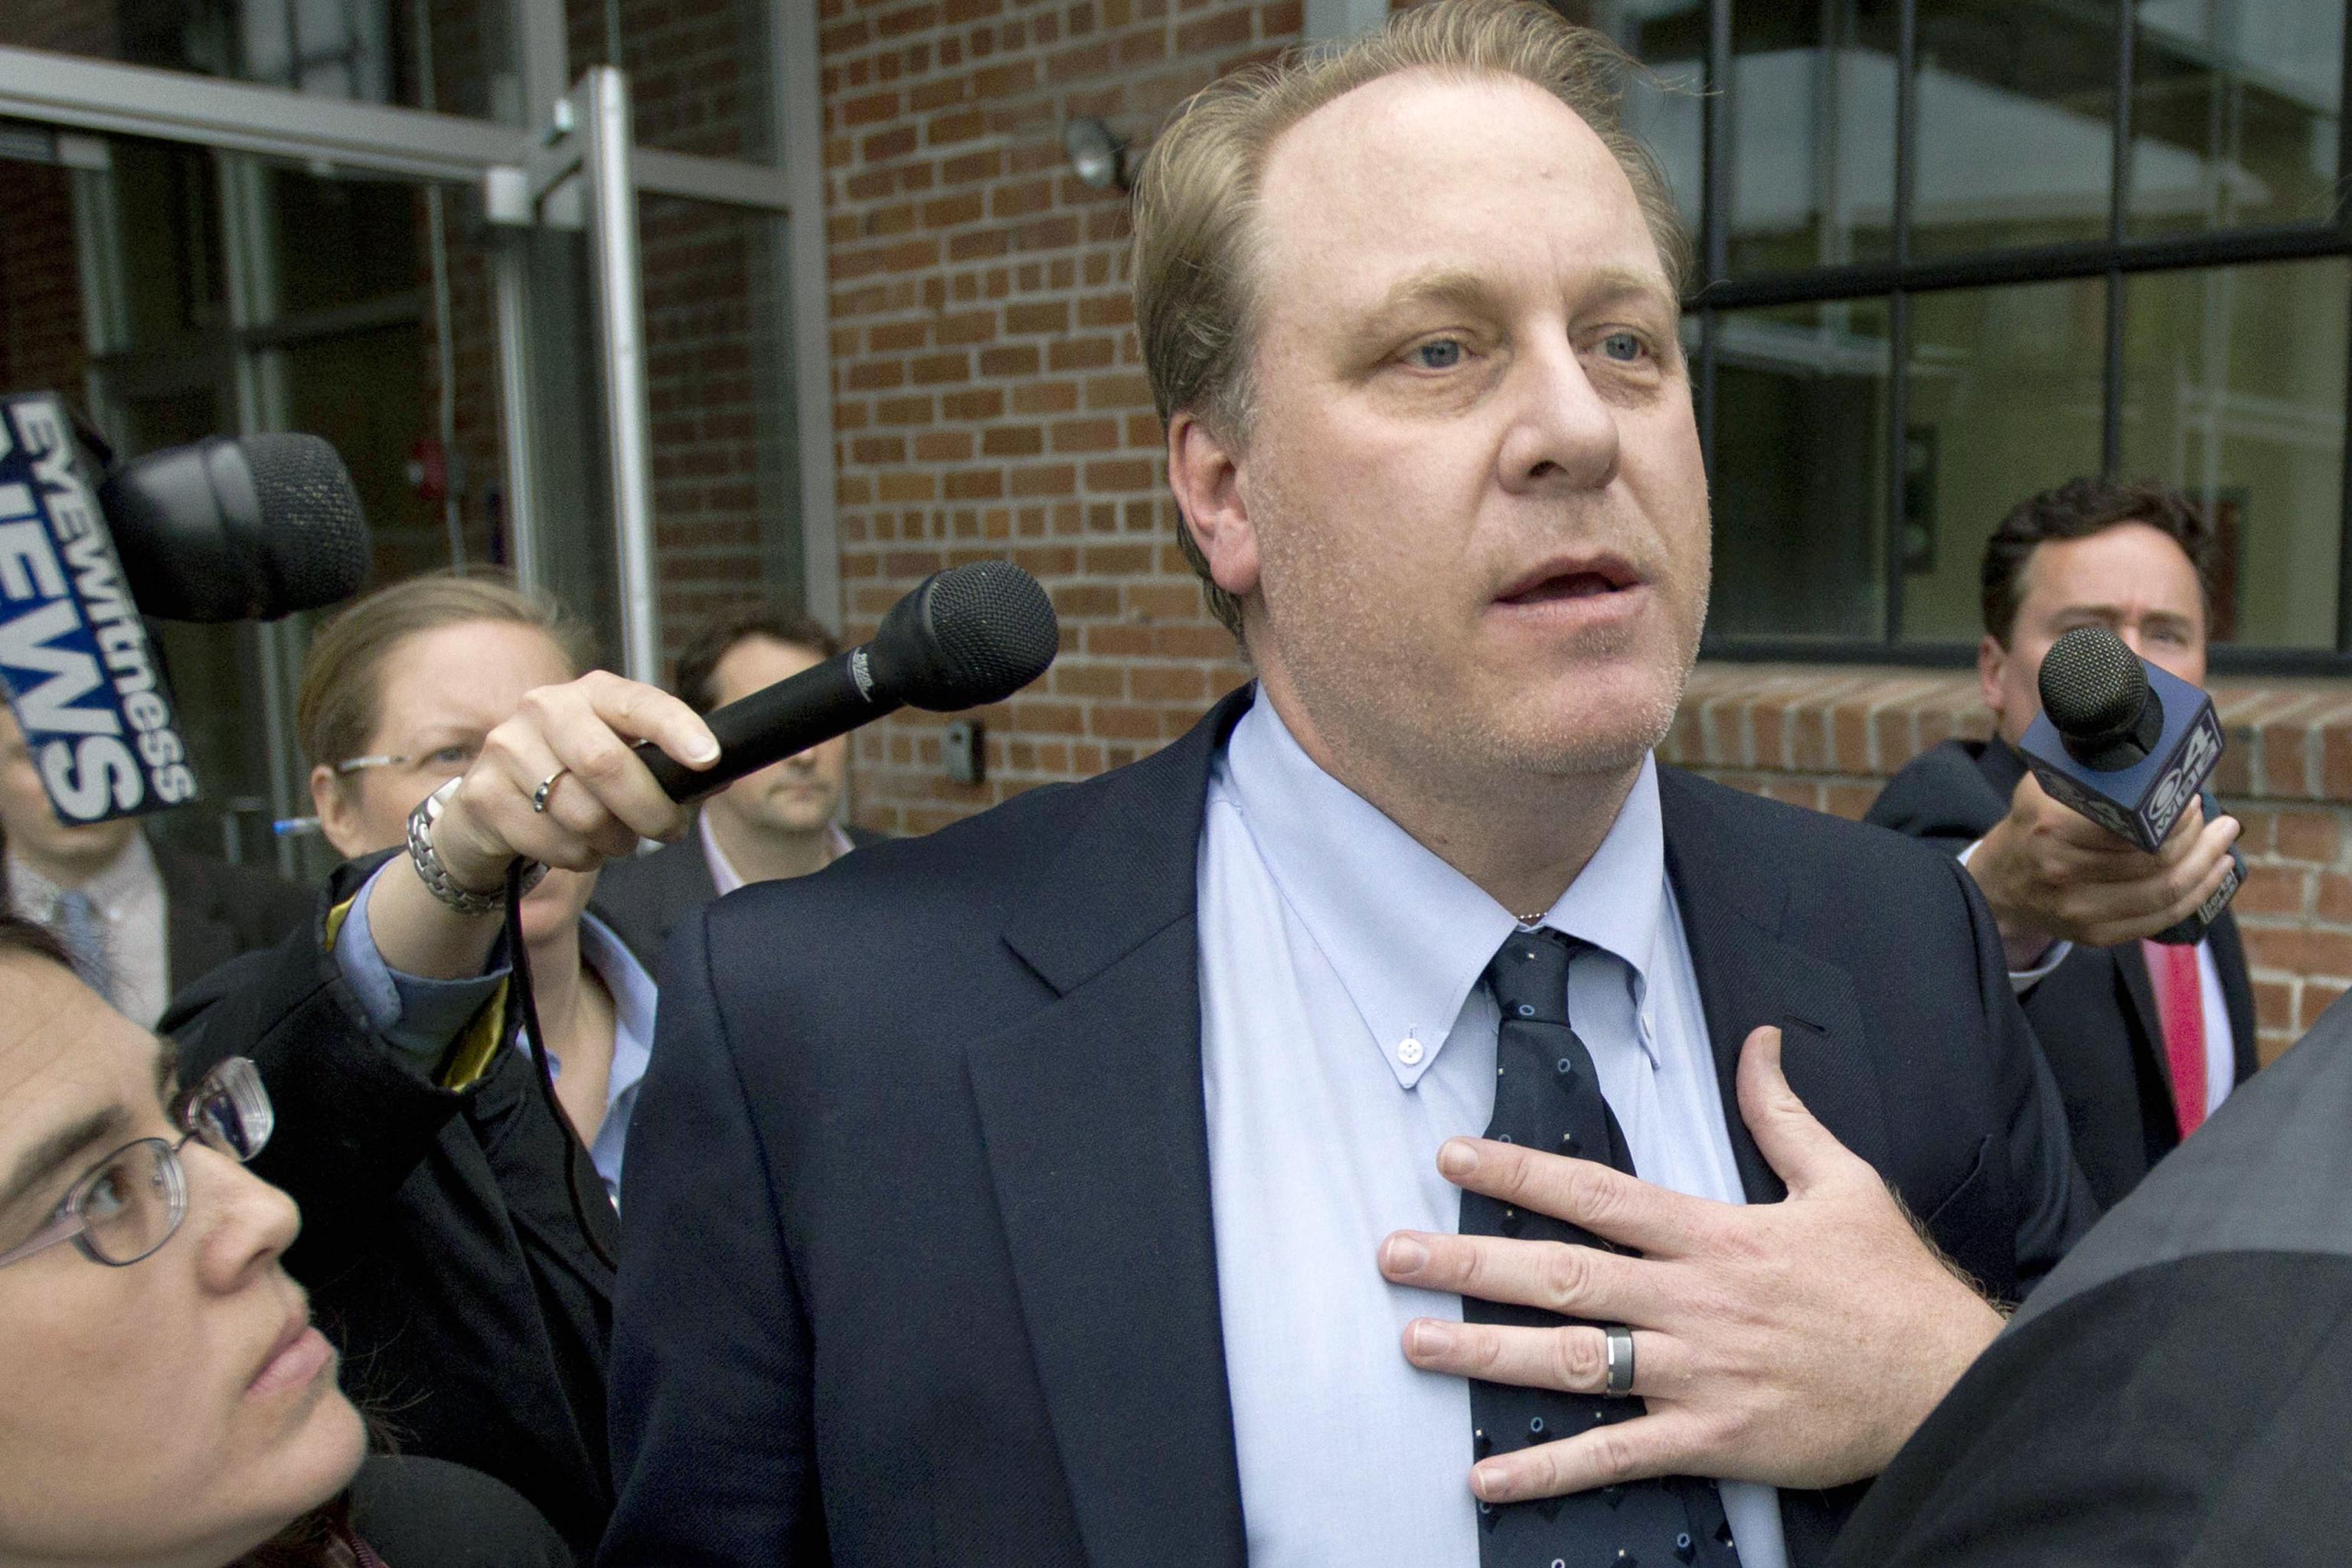 Curt Schilling Transgender: From 3× World Series champion to getting sacked  by ESPN for anti-transgender stance: The Red Sox veteran Curt Schilling's  backstory behind HOF snub